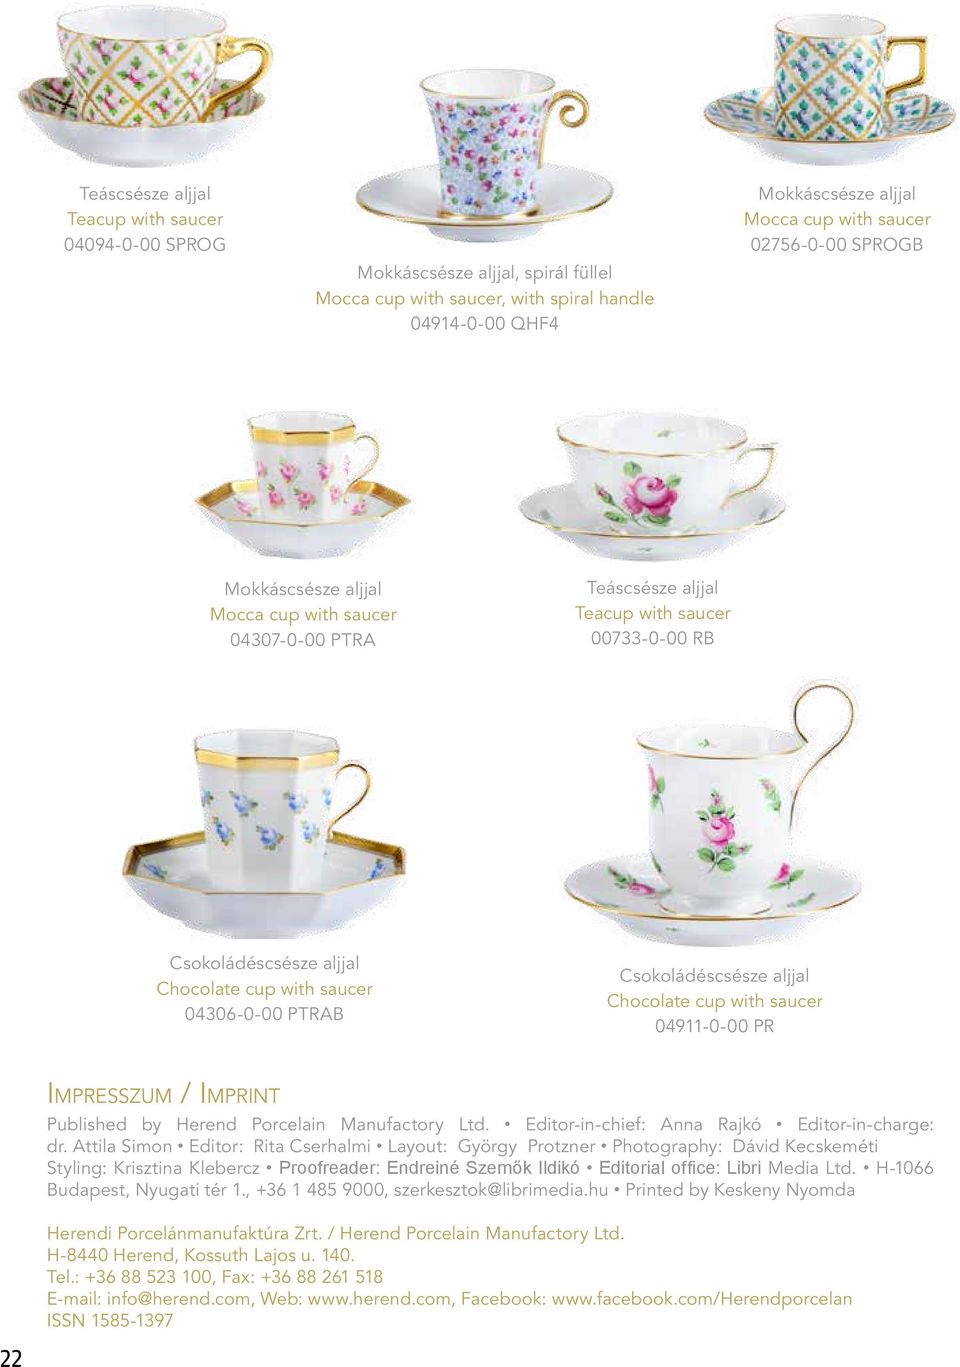 aljjal Chocolate cup with saucer 04911-0-00 PR Impresszum / Imprint Published by Herend Porcelain Manufactory Ltd. Editor-in-chief: Anna Rajkó Editor-in-charge: dr.